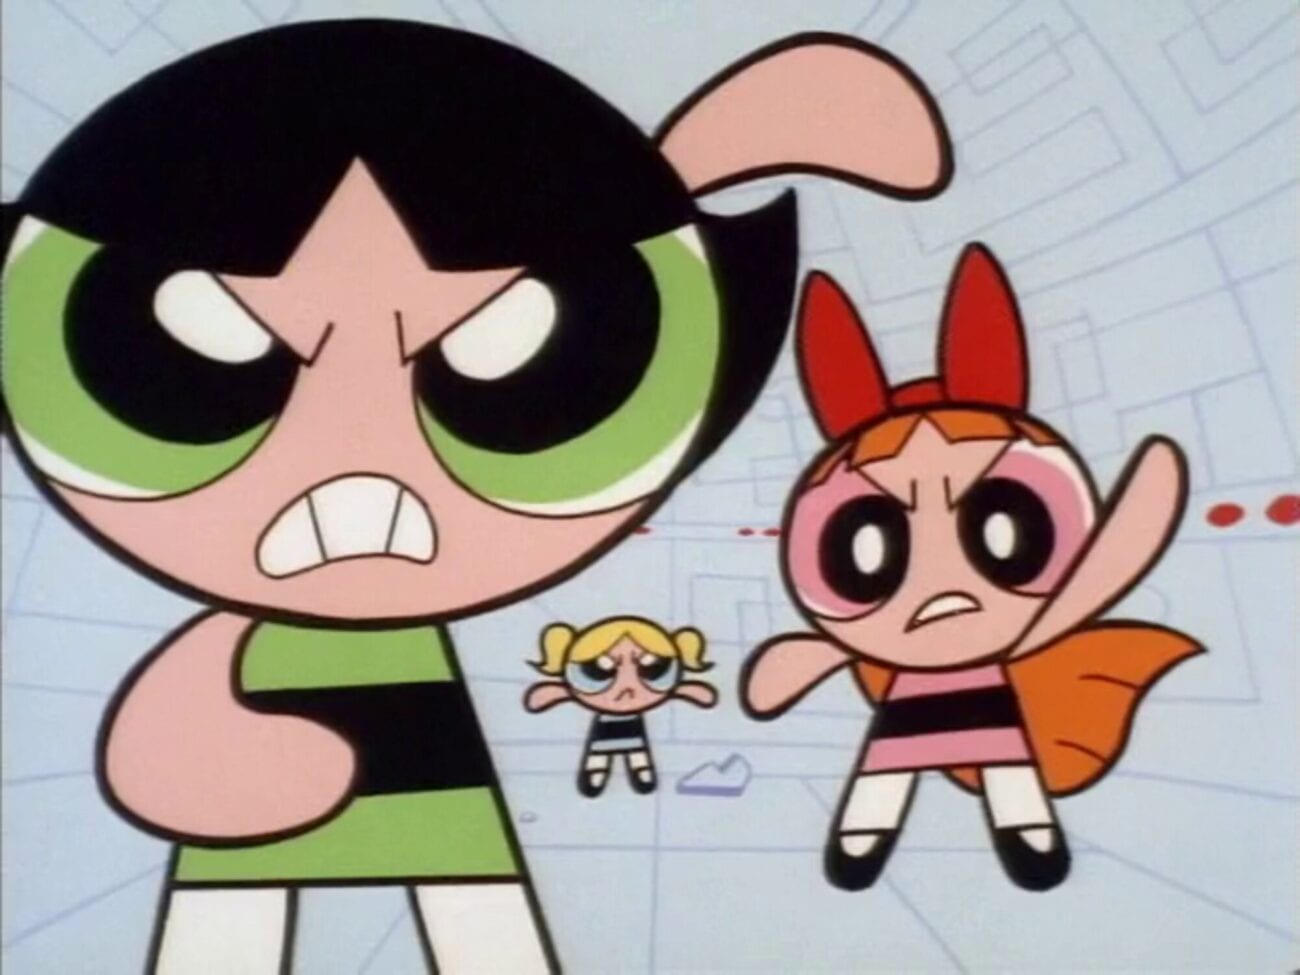 Ready for a good ol' nostalgia kick? Check out our list of all the best cartoon shows from the 90s here from 'Power Rangers' to 'Powerpuff Girls'.